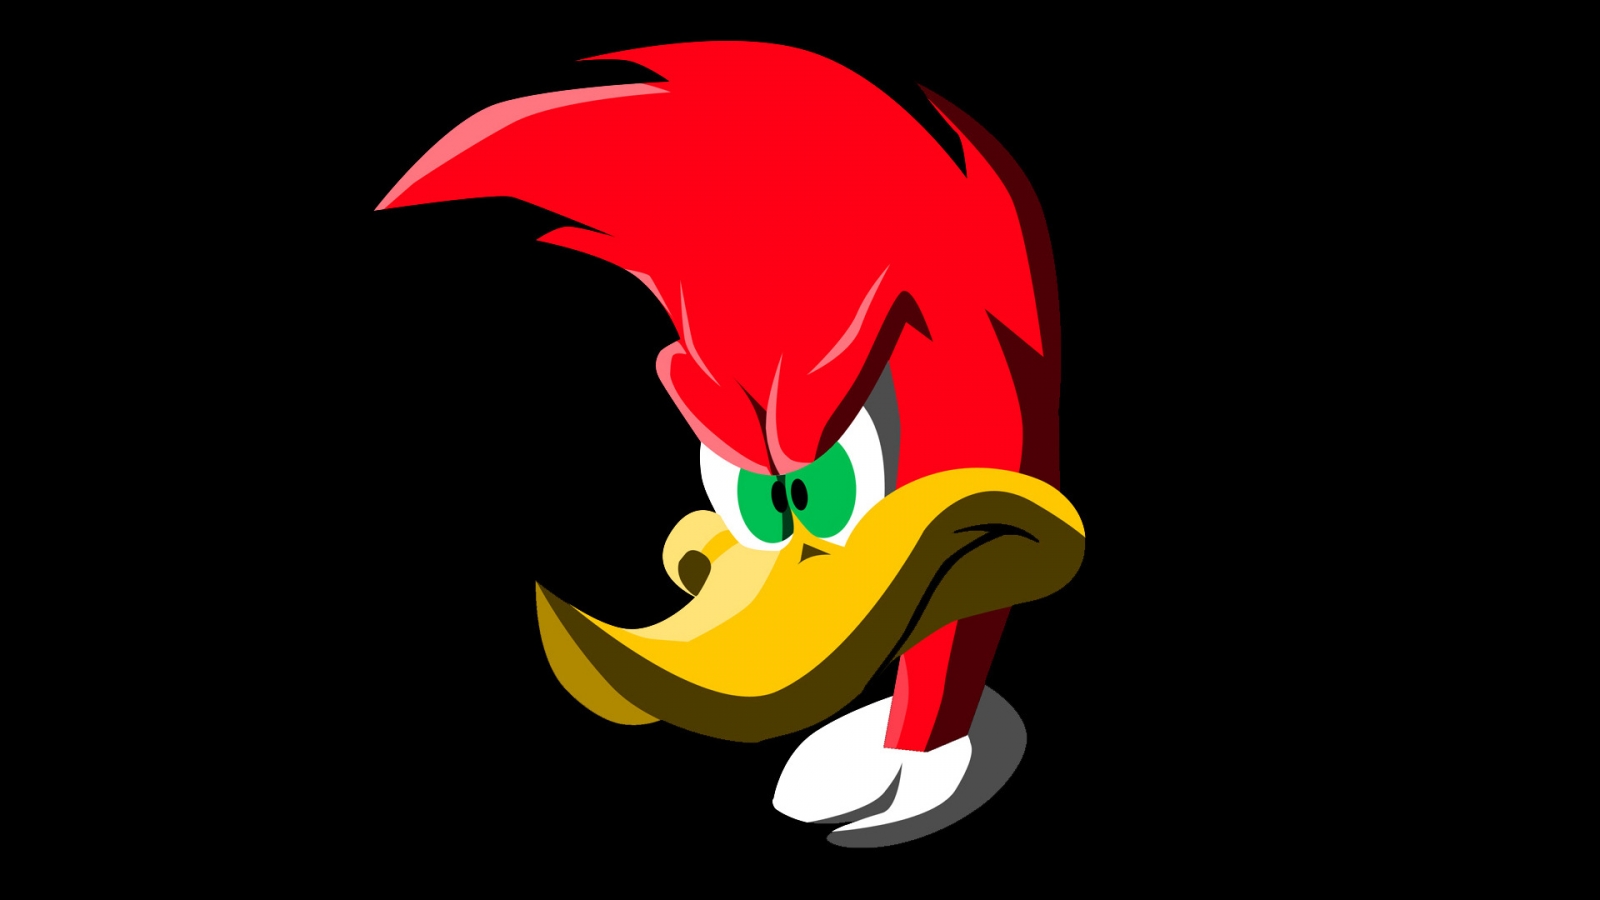 Woody Woodpecker for 1600 x 900 HDTV resolution